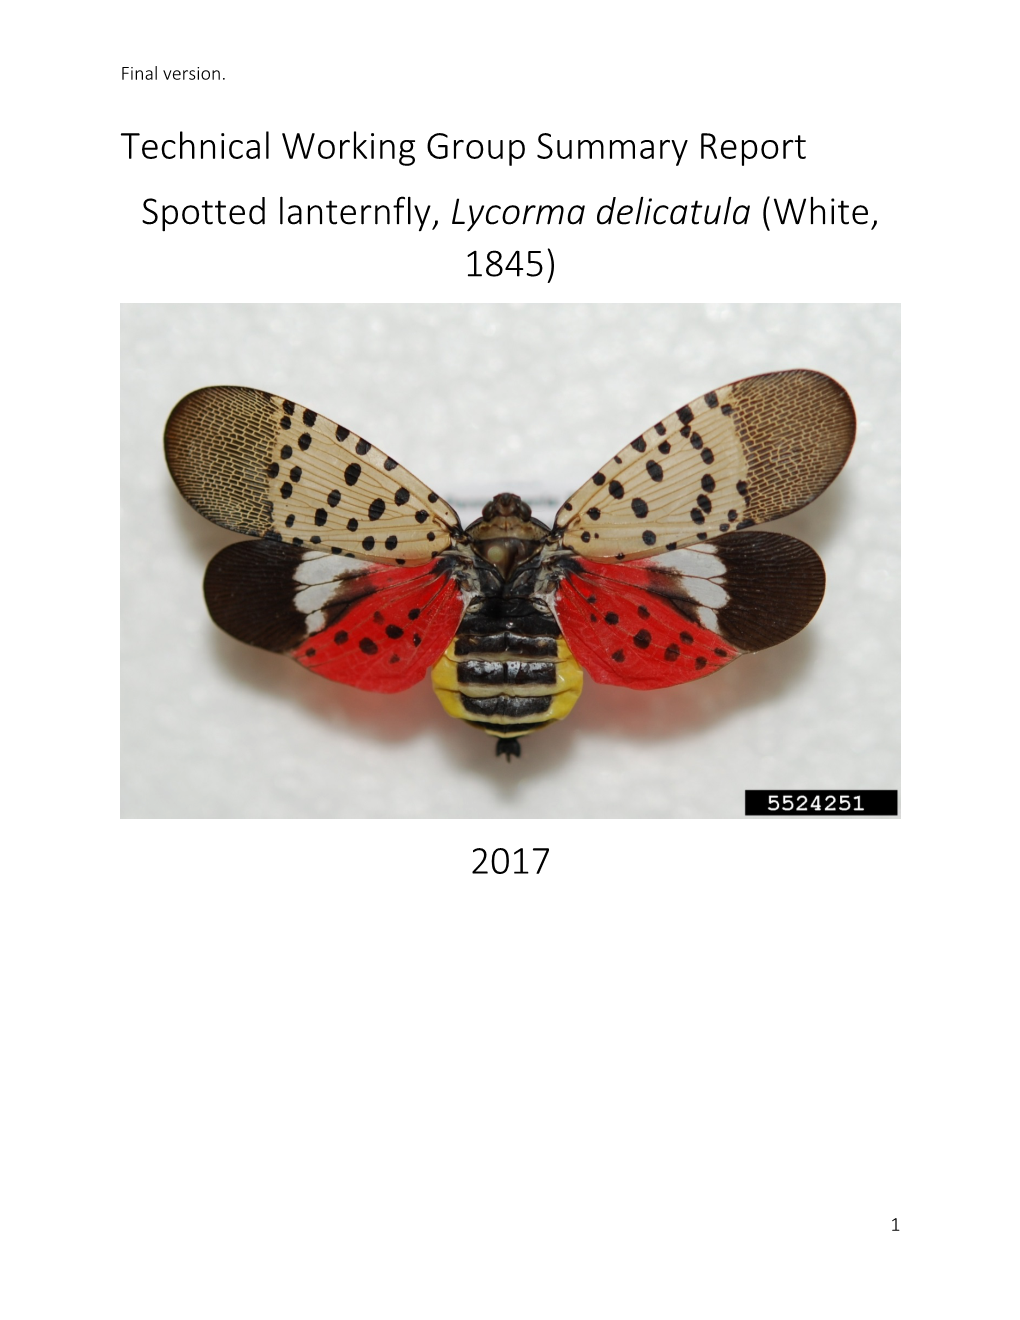 Spotted Lanternfly, Lycorma Delicatula (White, 1845)